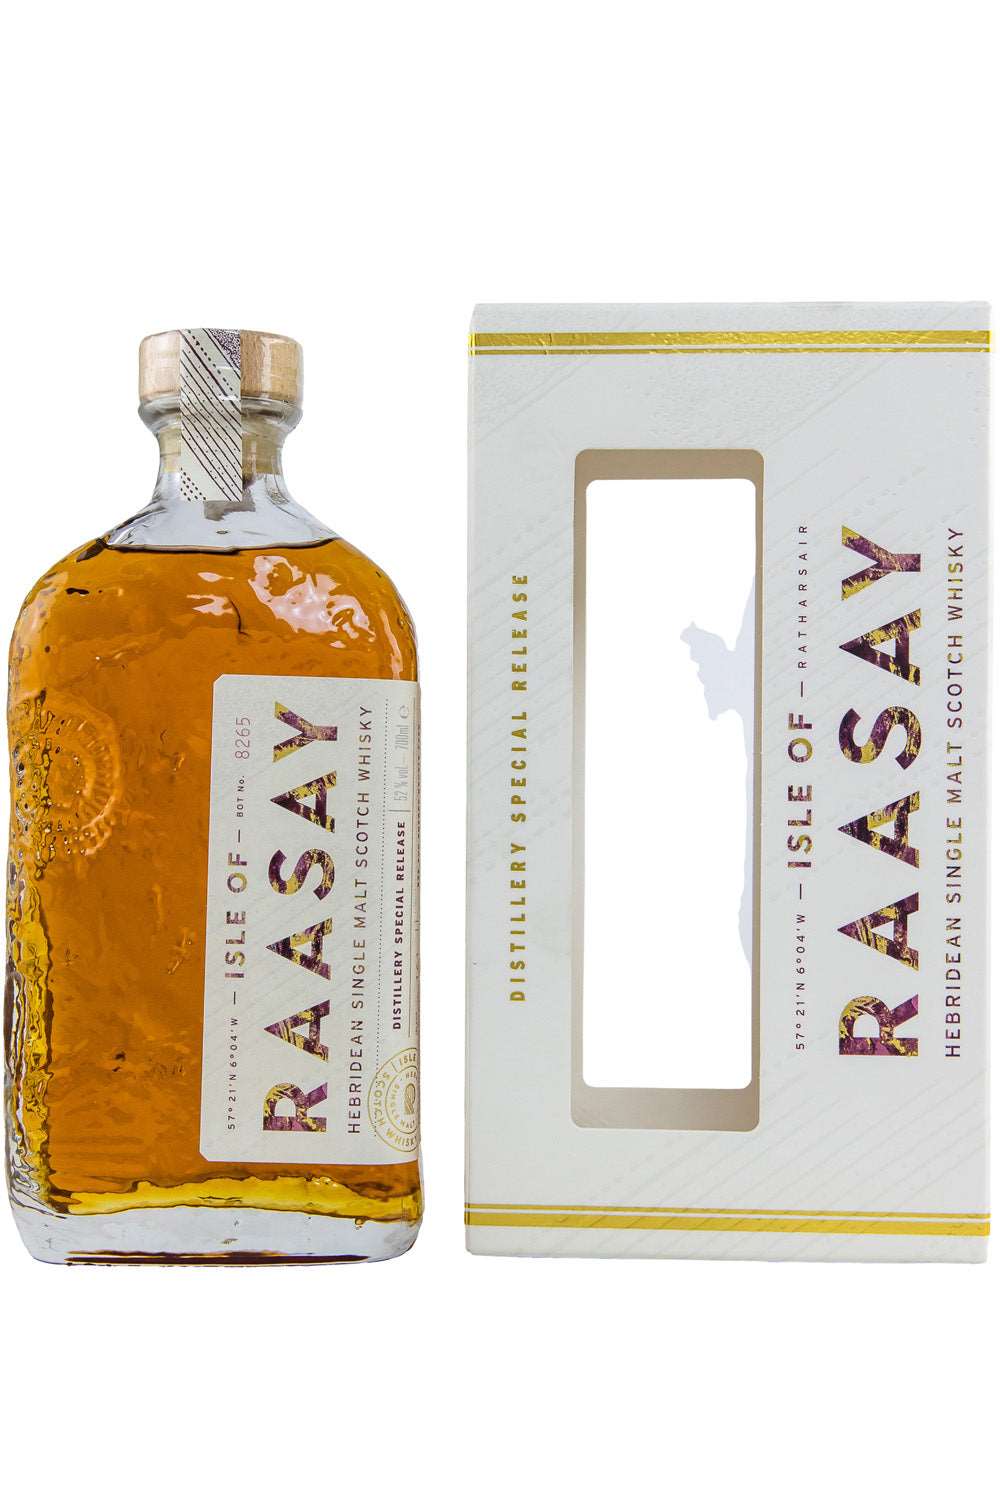 Isle of Raasay Destillery Special Release Sherry Finish 52% 700ml - Maltimore